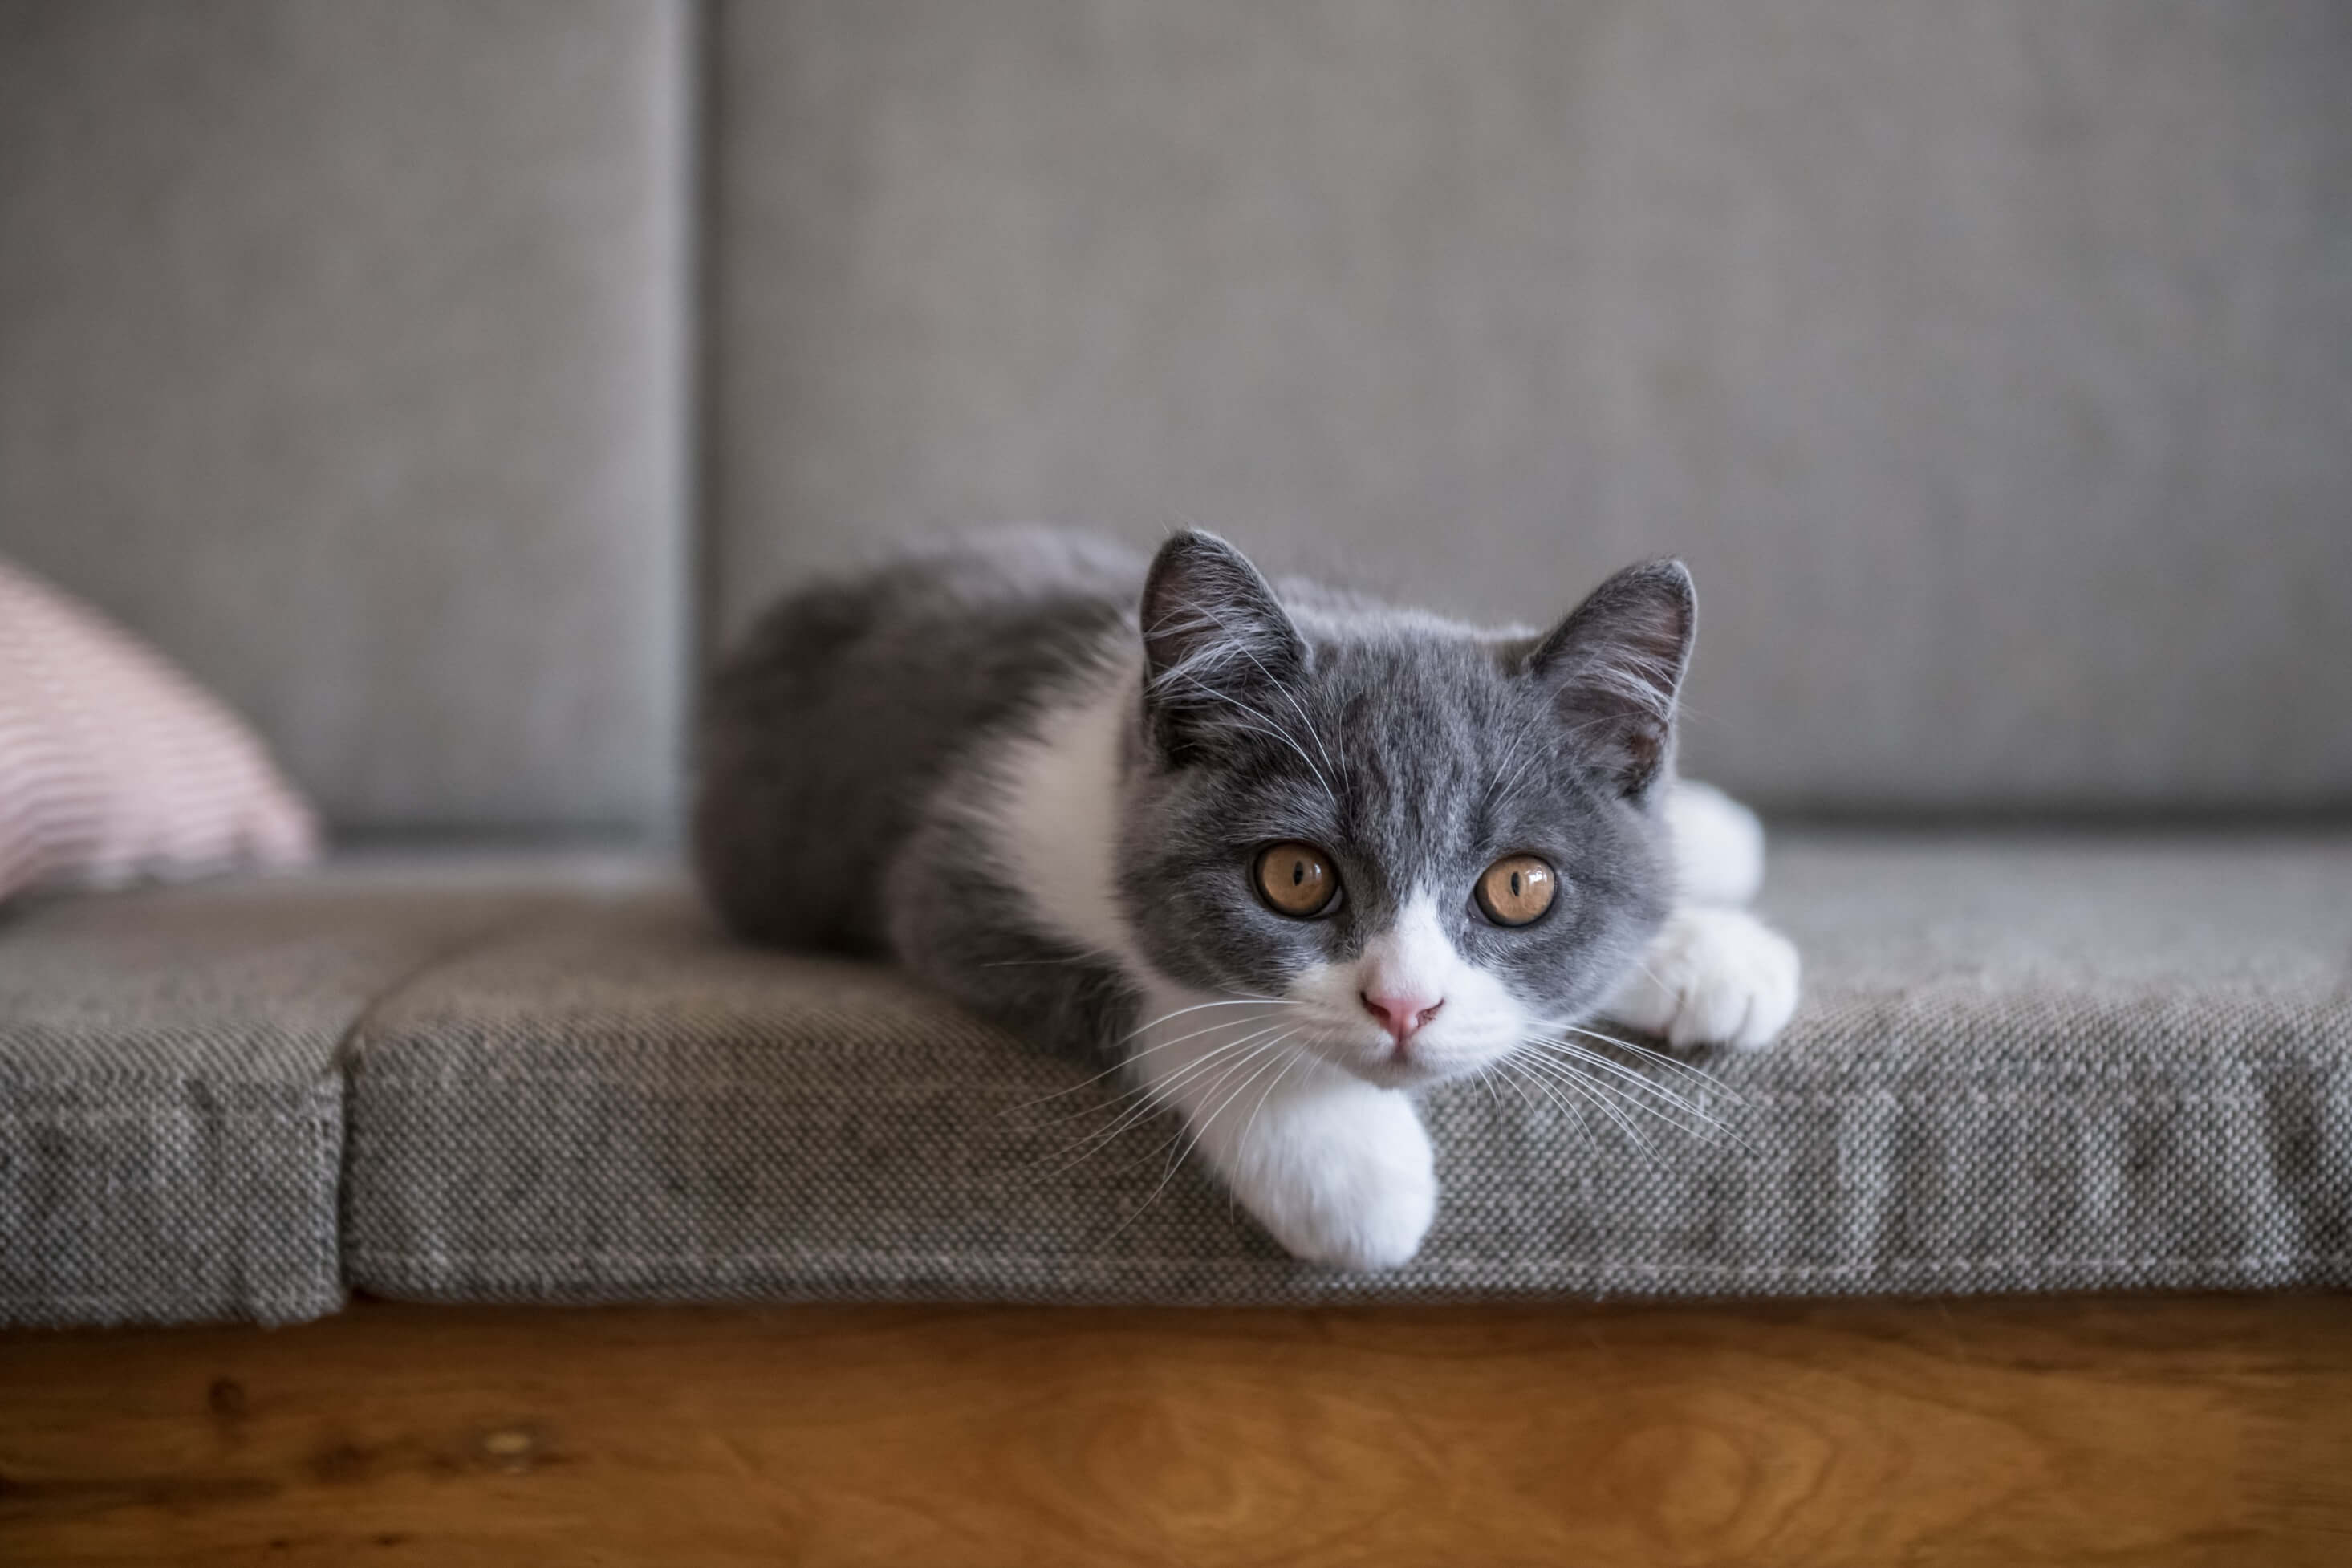 Grey and white kitten looks directly at camera while laying on couch.